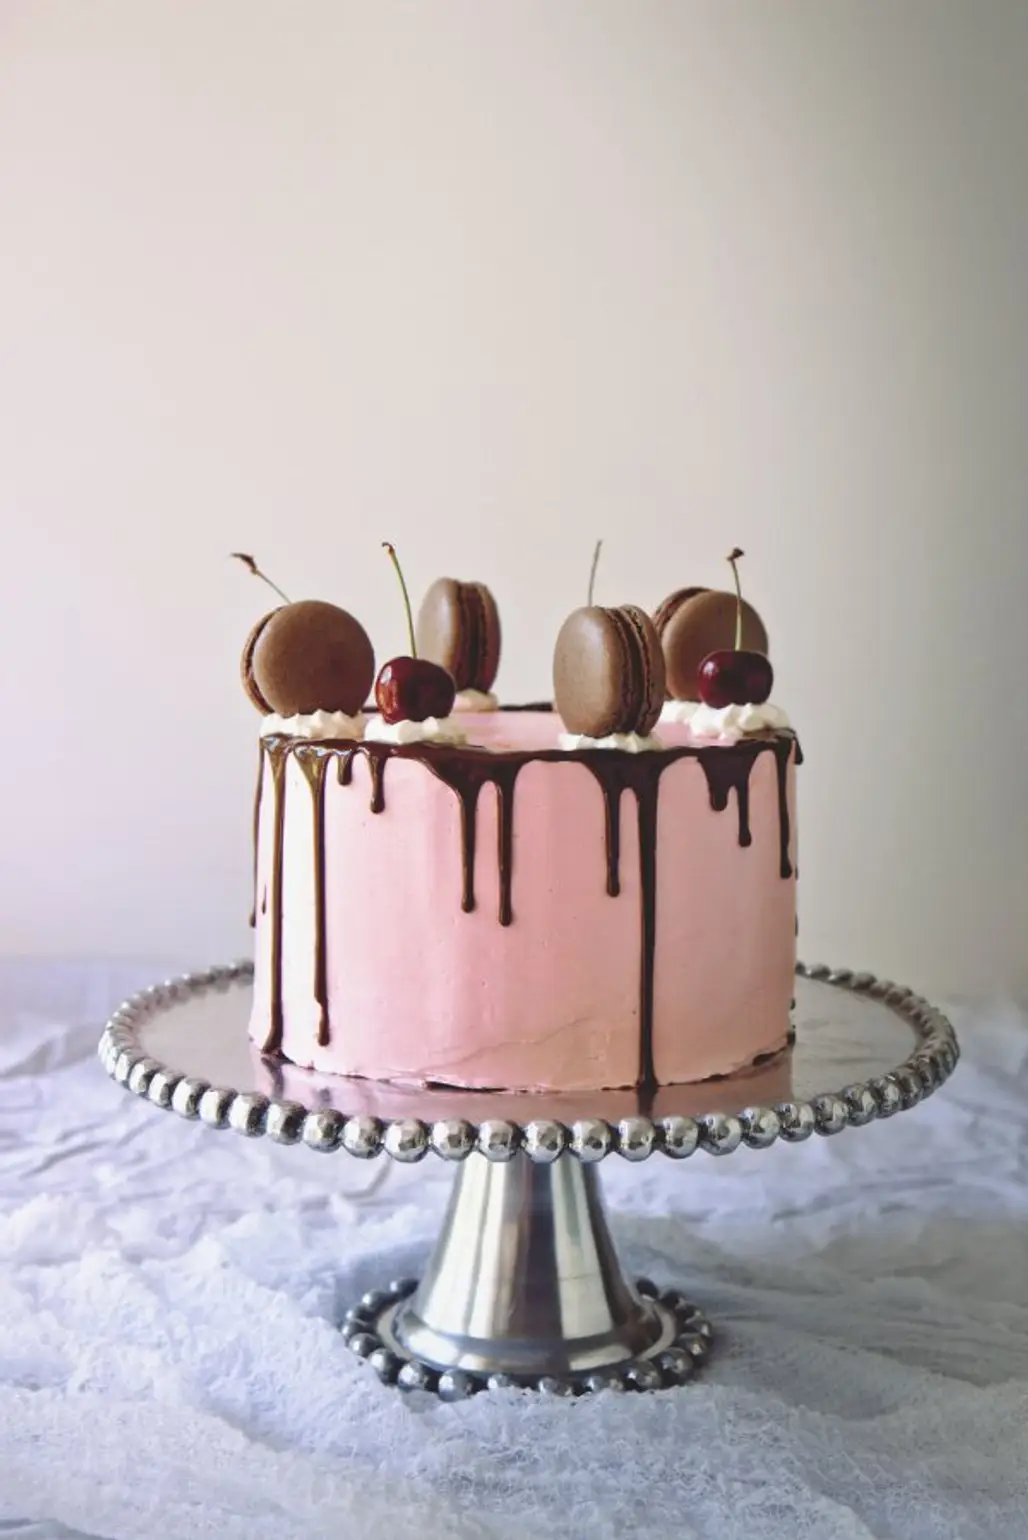 Forêt Noire (Black Forest) Cake with Boozy Cherries